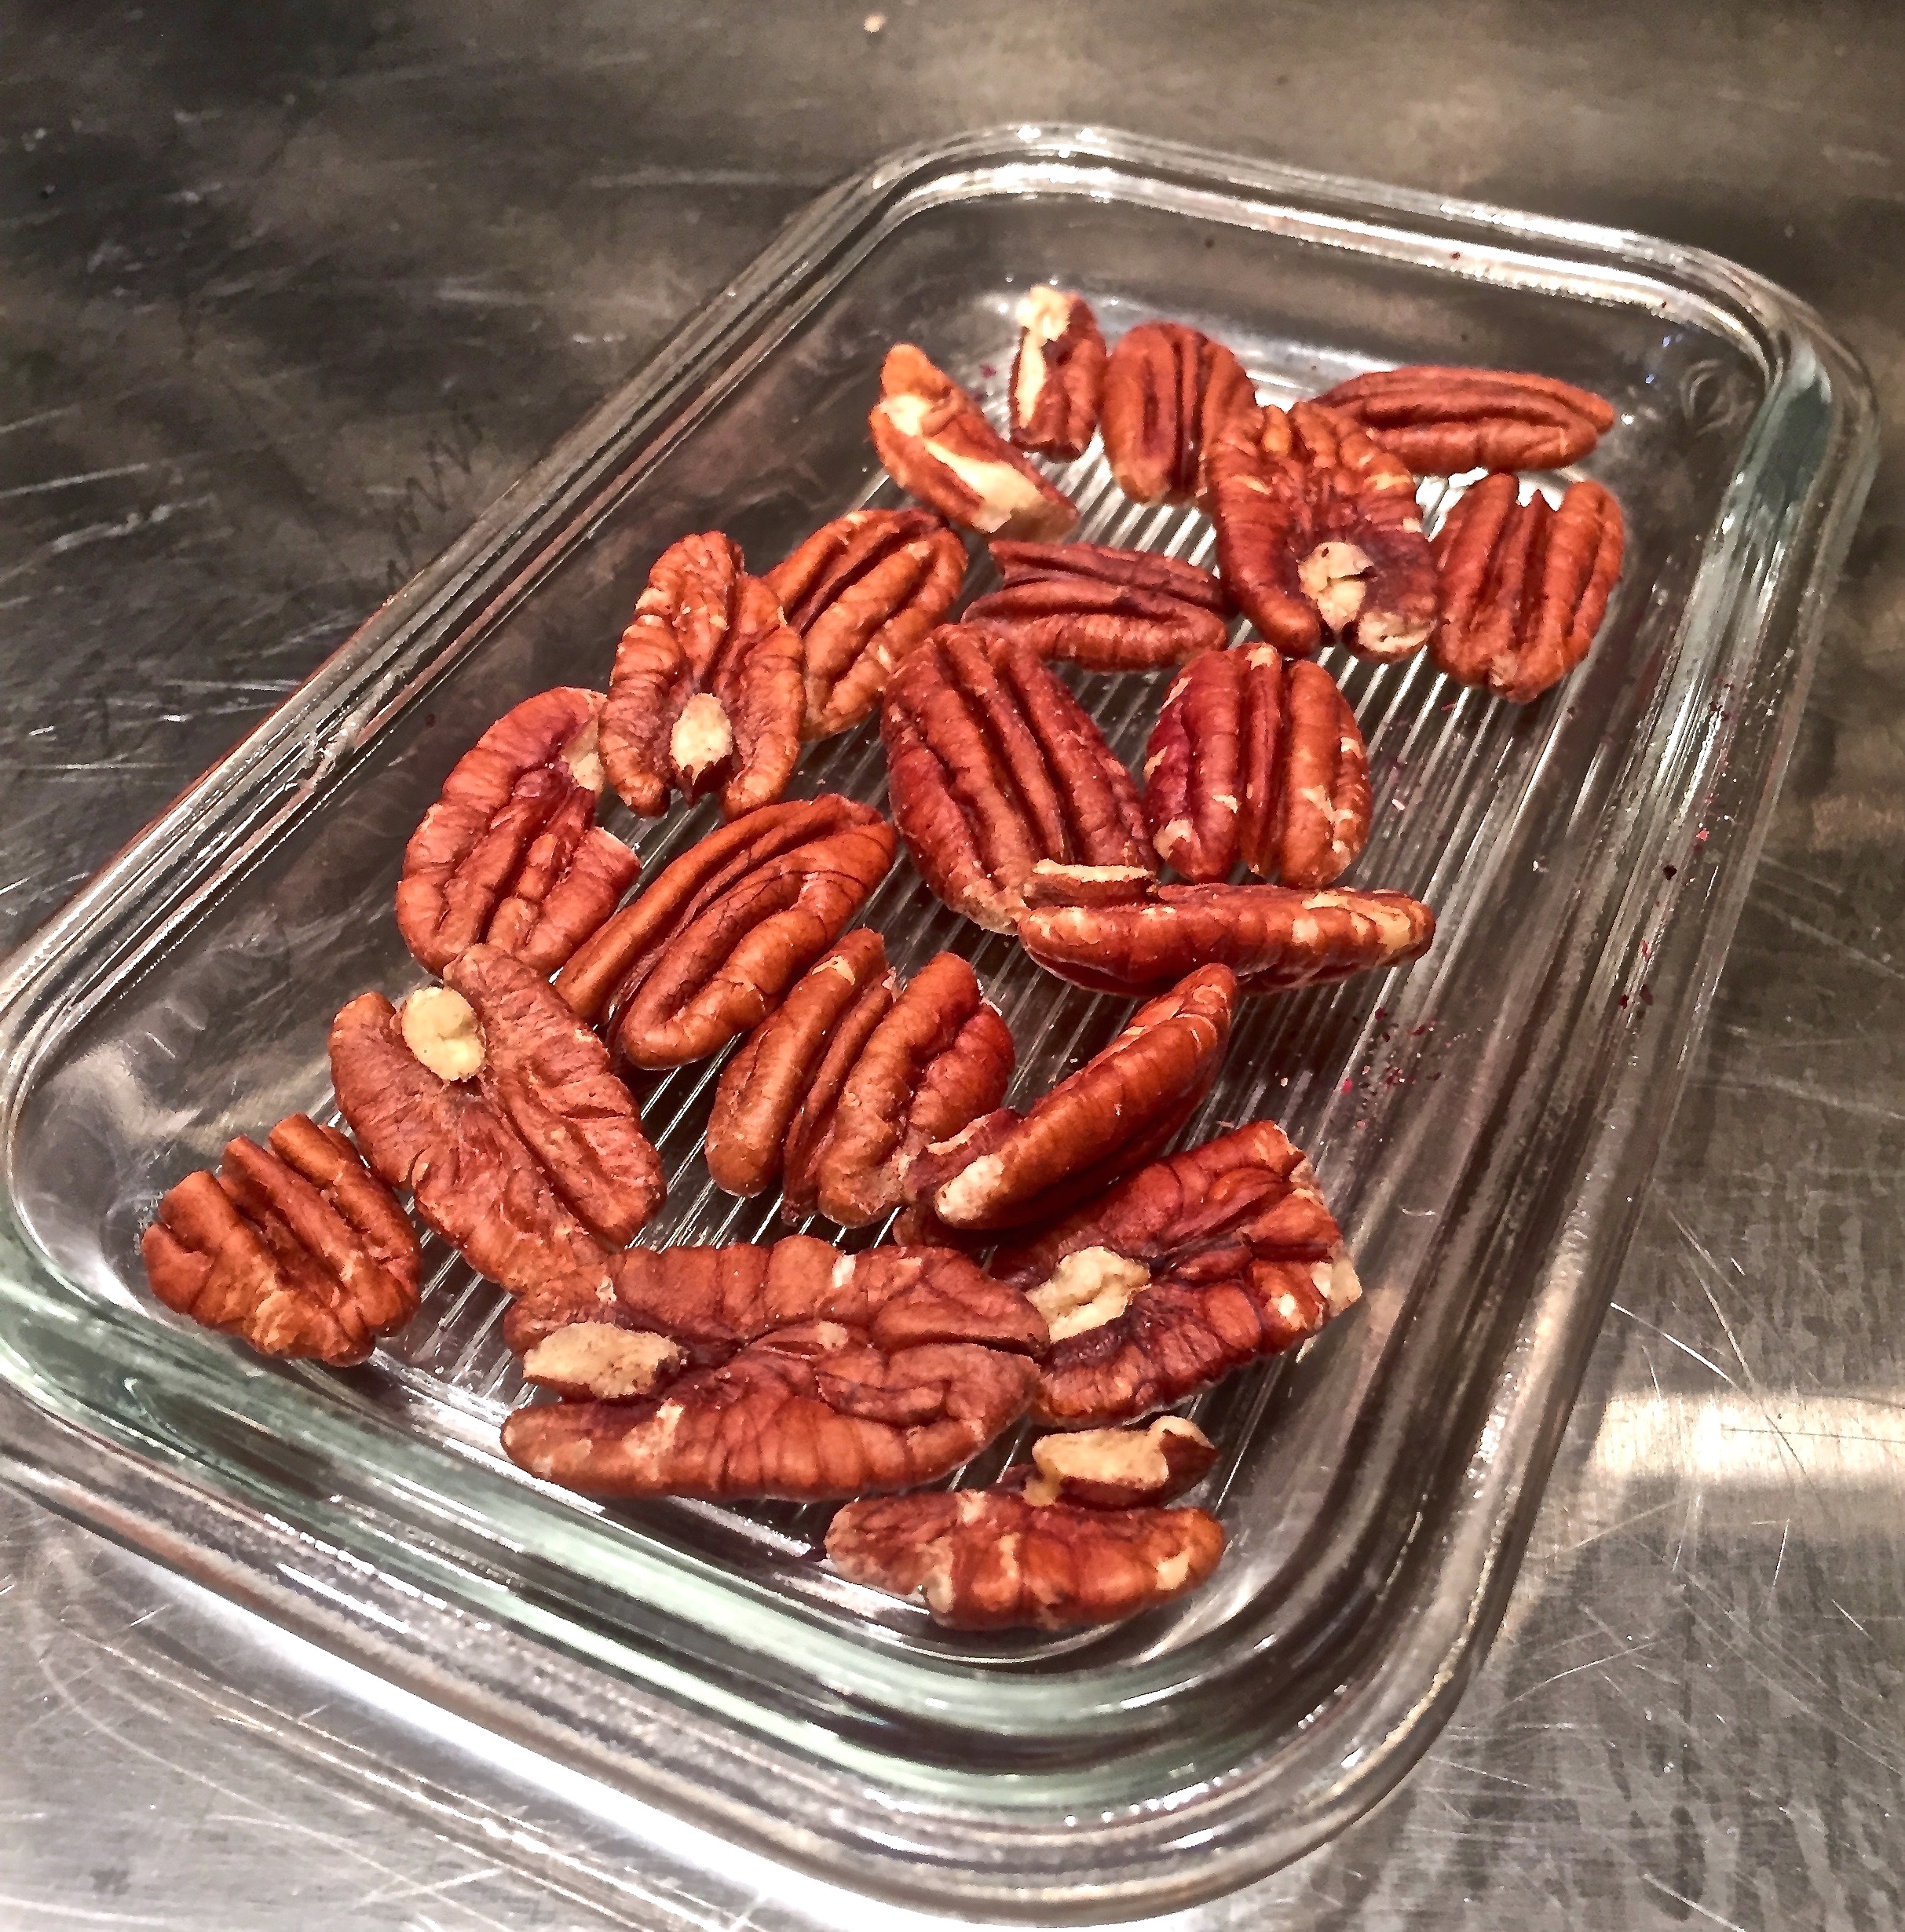 Roasted Texas pecans are what make pecan caramel delicious